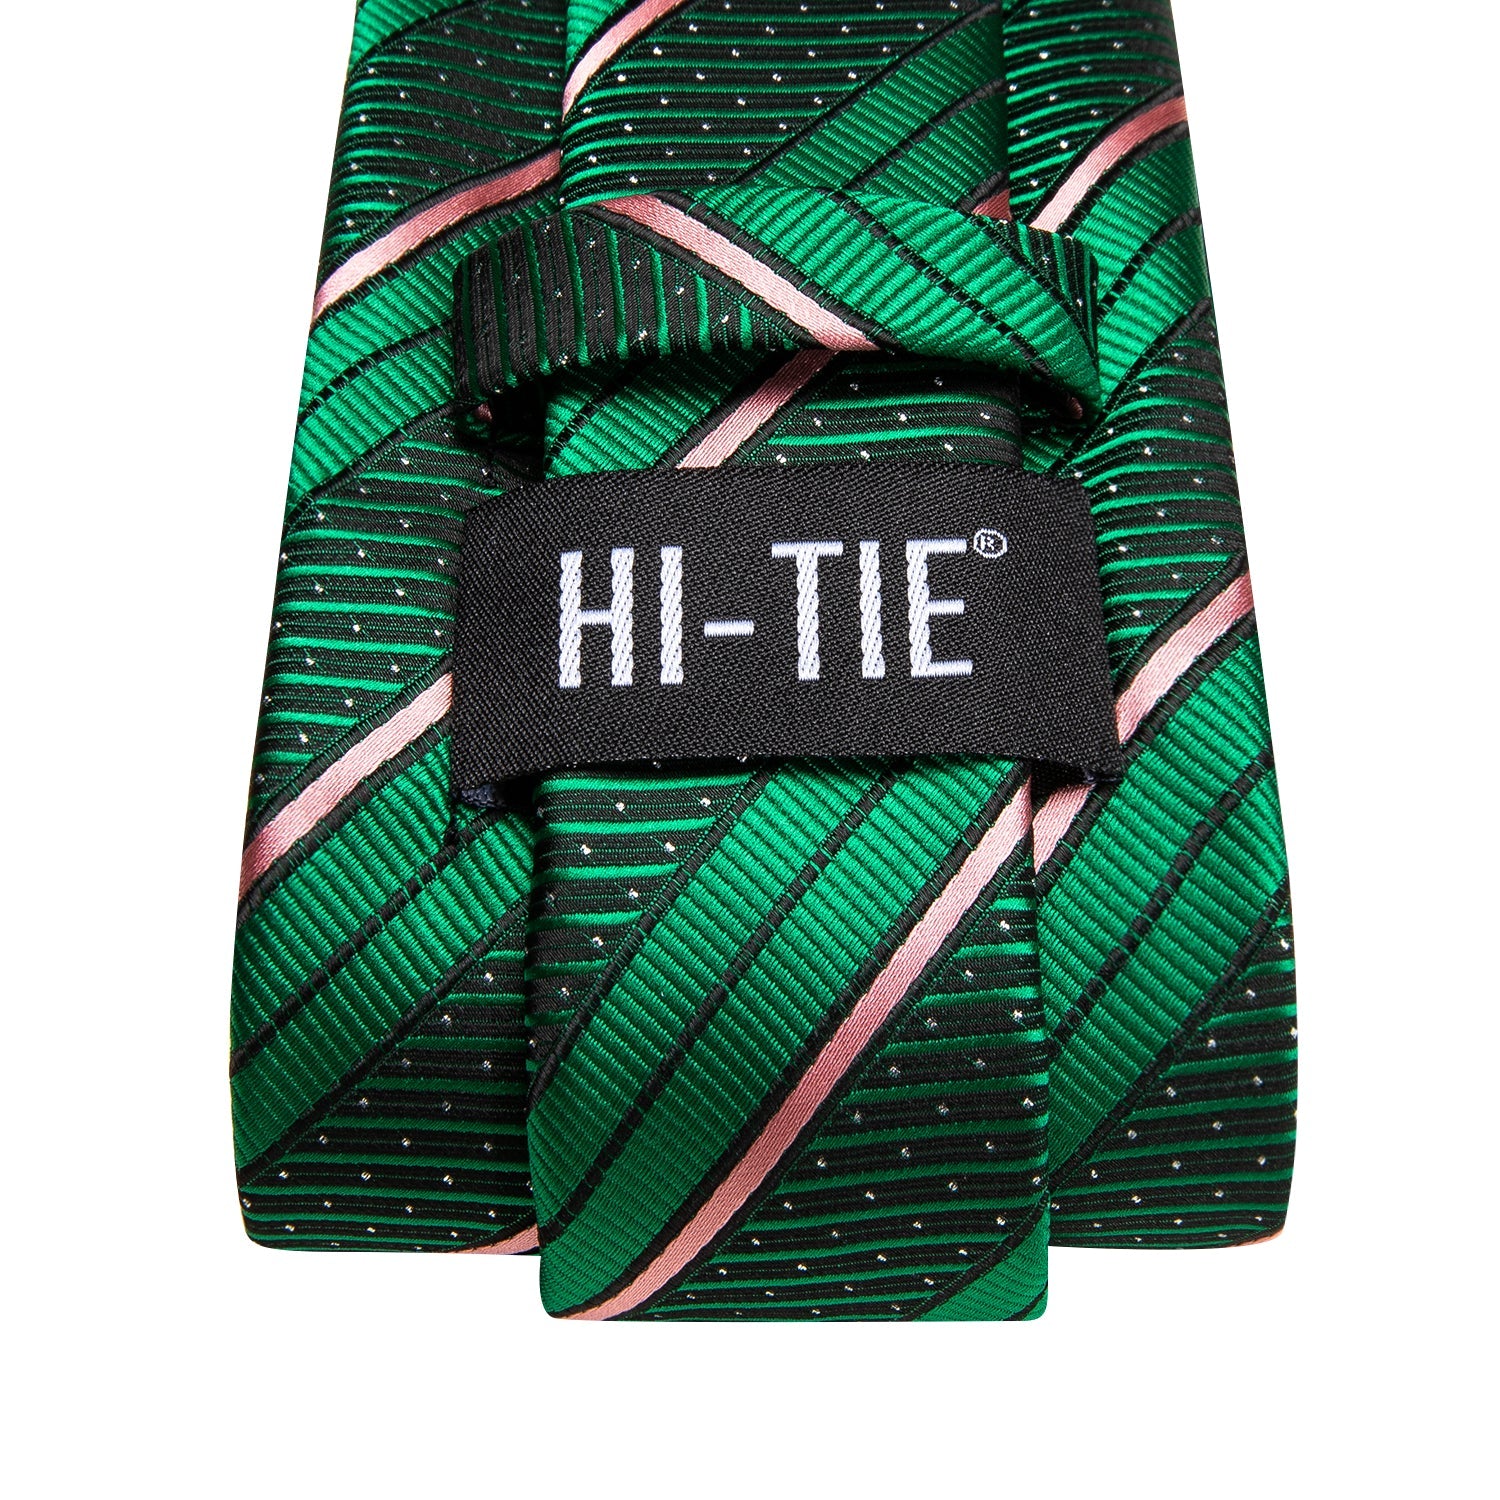 Green Pink Strip with White Dot 70 Inches Extra Long Necktie Pocket Square Cufflinks Set